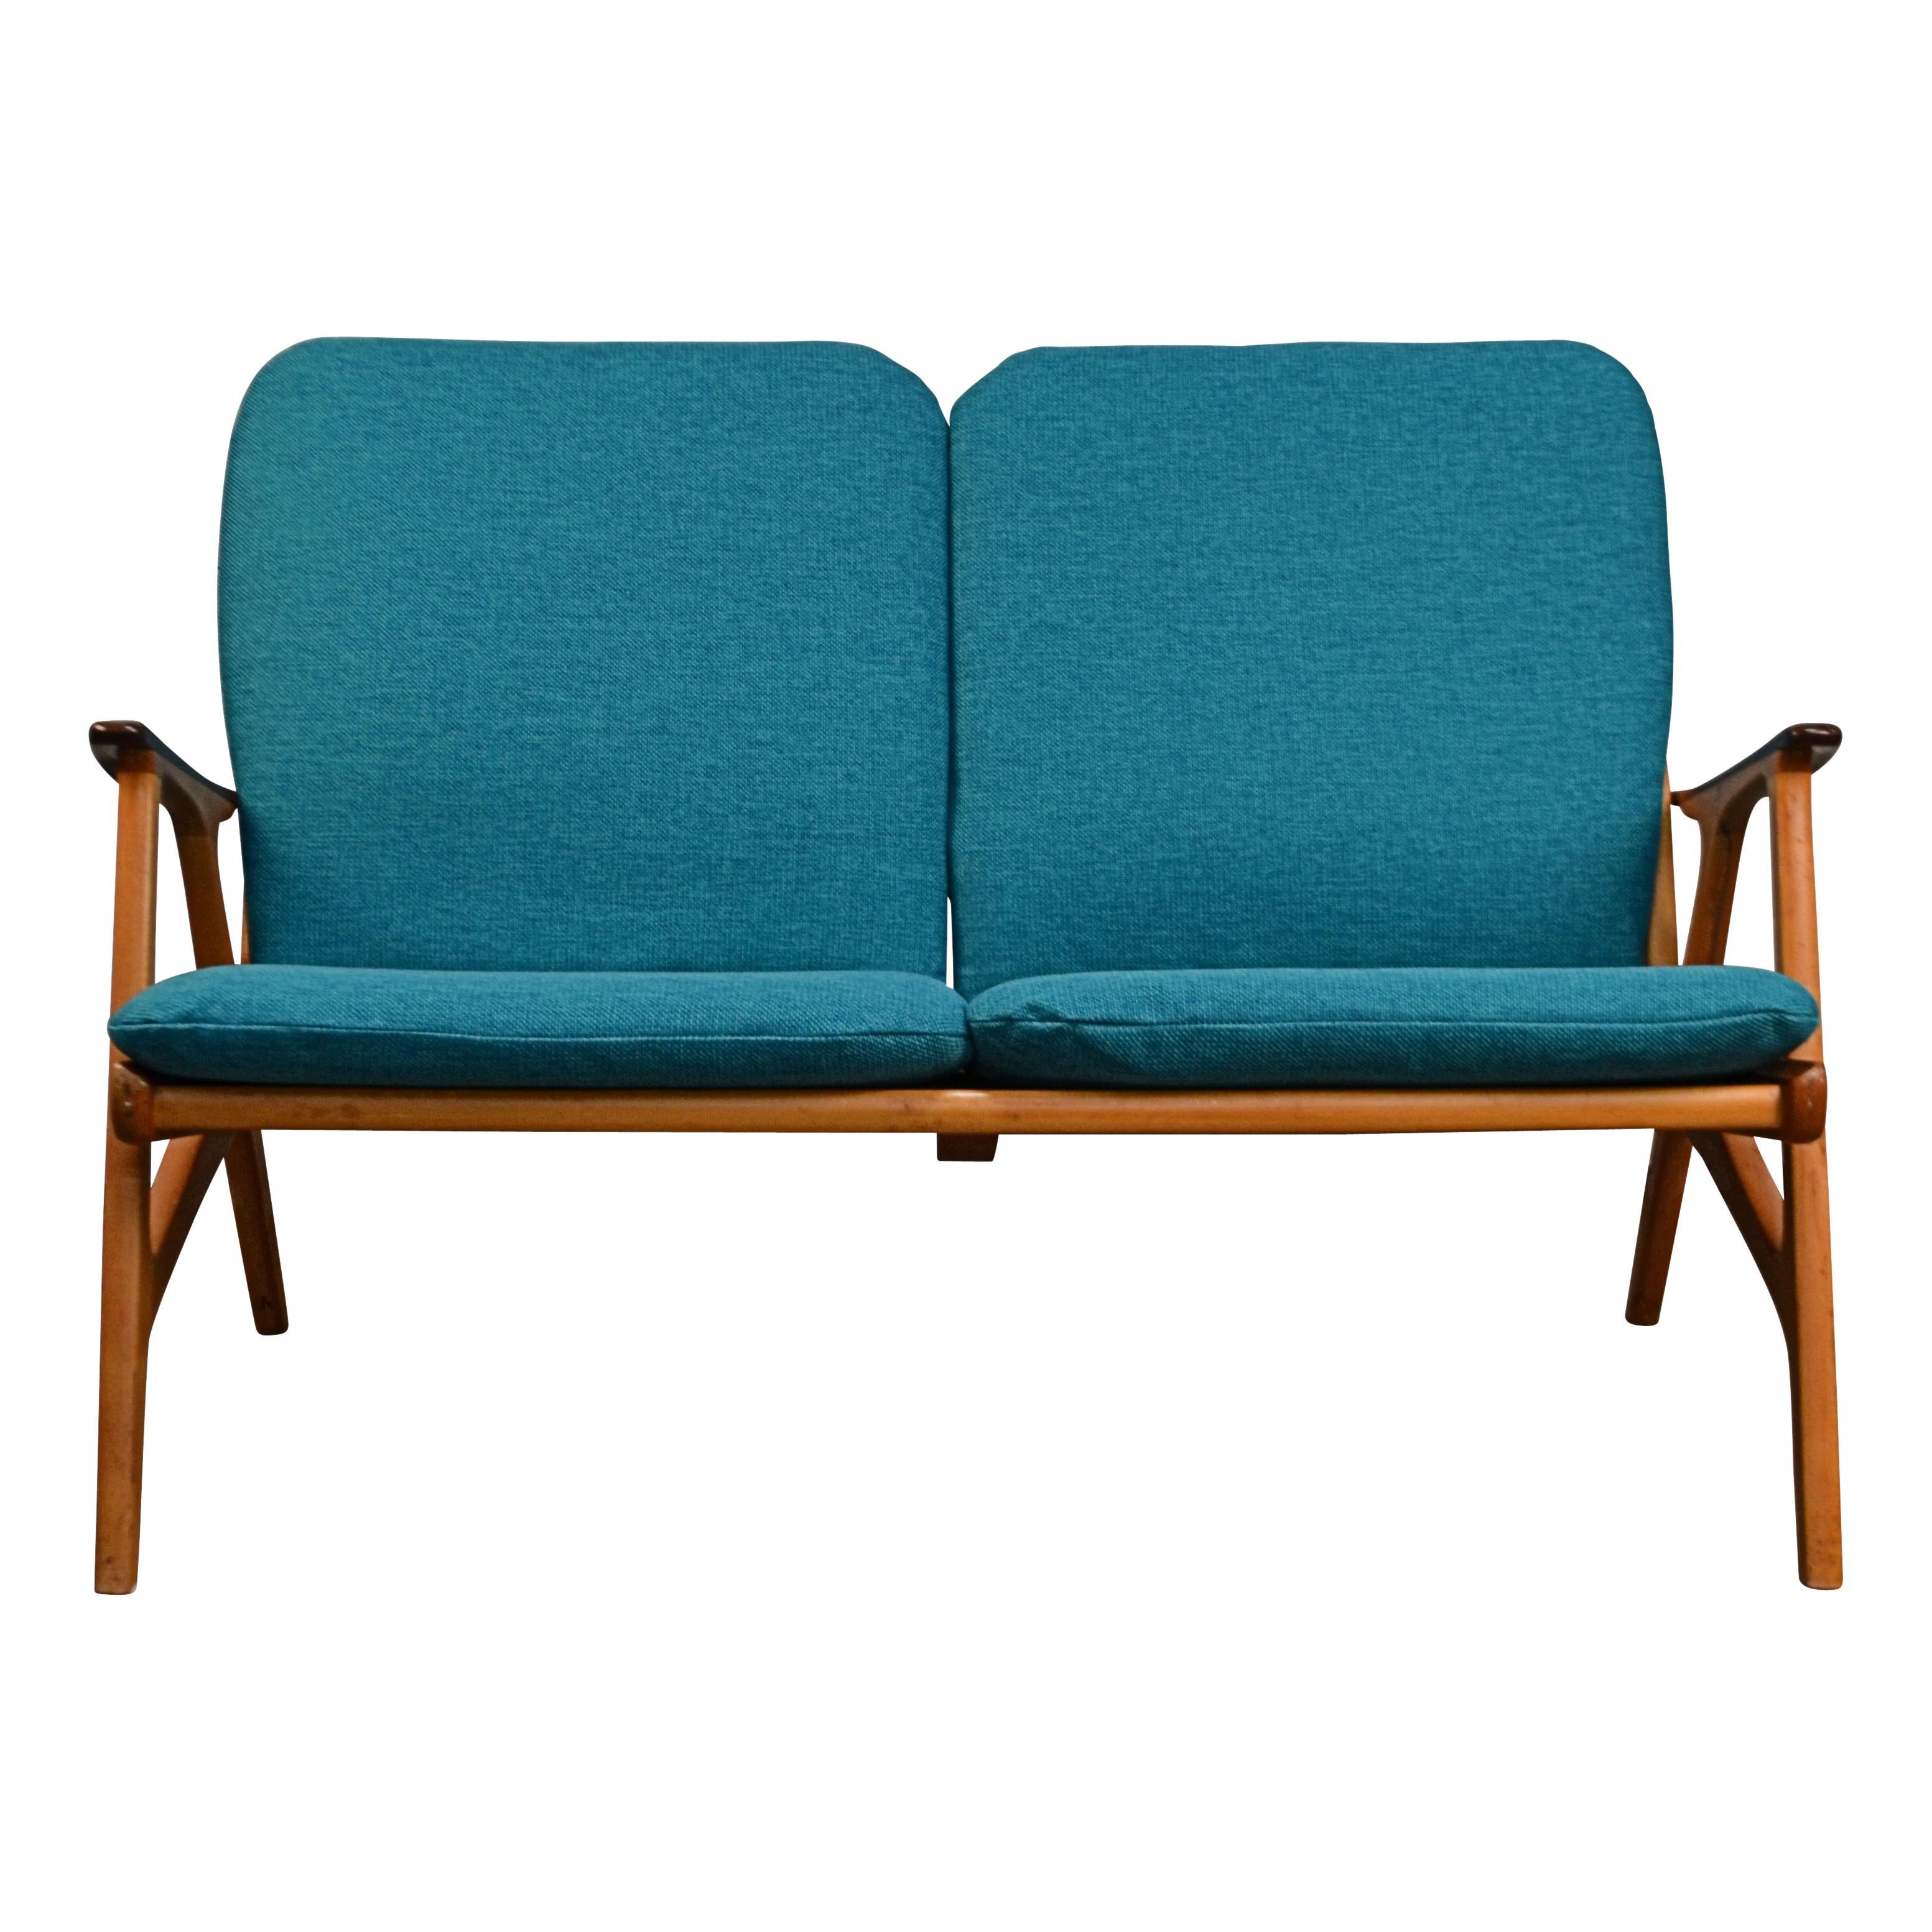 Vintage Swedish two-seater sofa and lounge chair designed by Svegard Markaryd. This teak and birch Mid-century modern seating group features a typical sixties design, new webbing to ensure many more years of seating comfort, and new blue/green